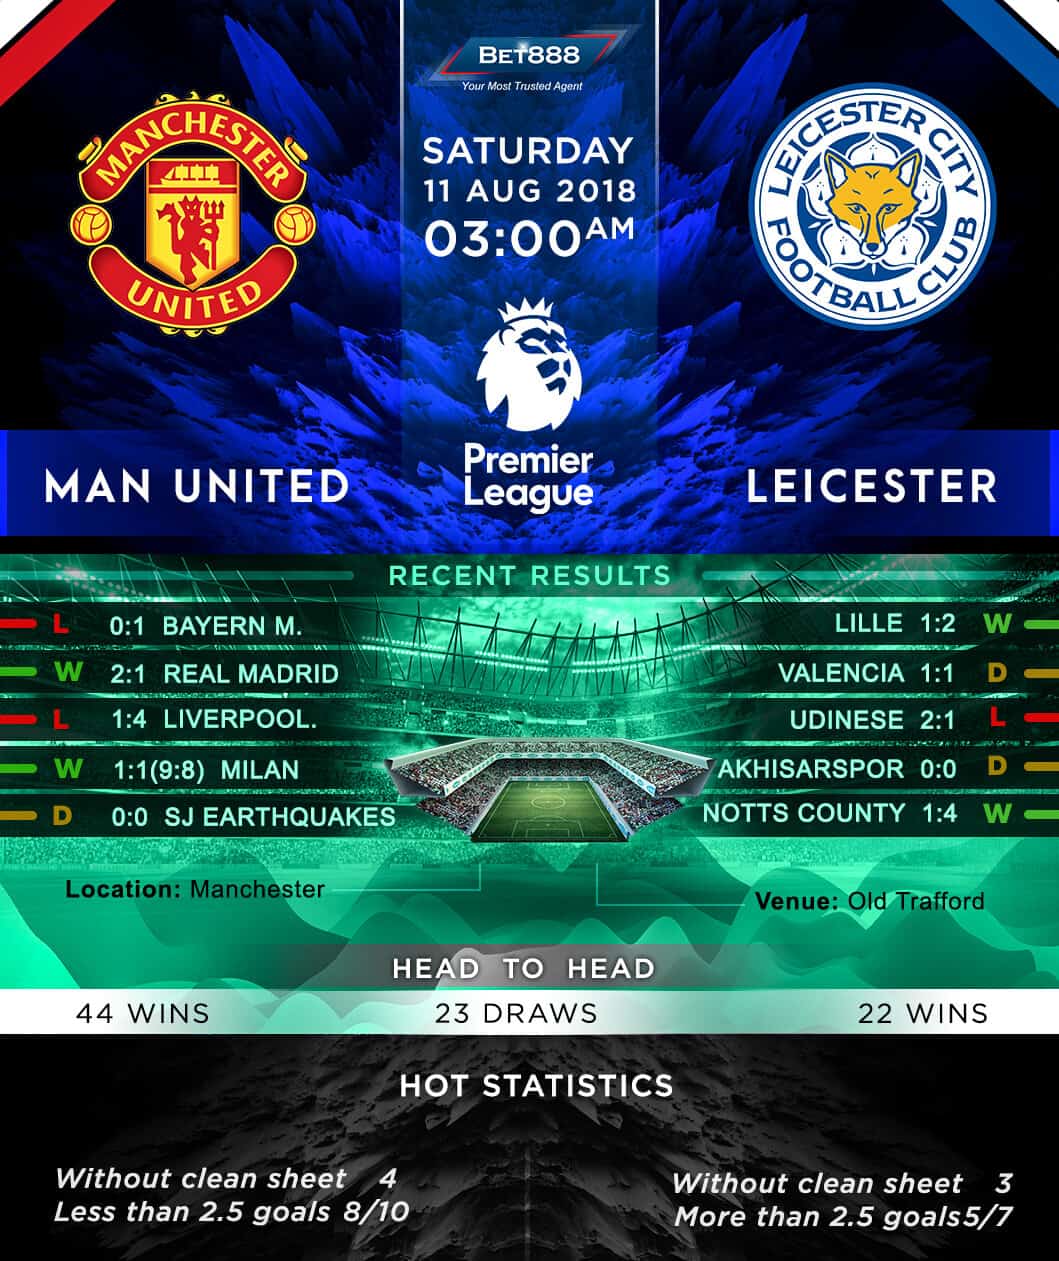 Manchester United vs Leicester City 11/08/18